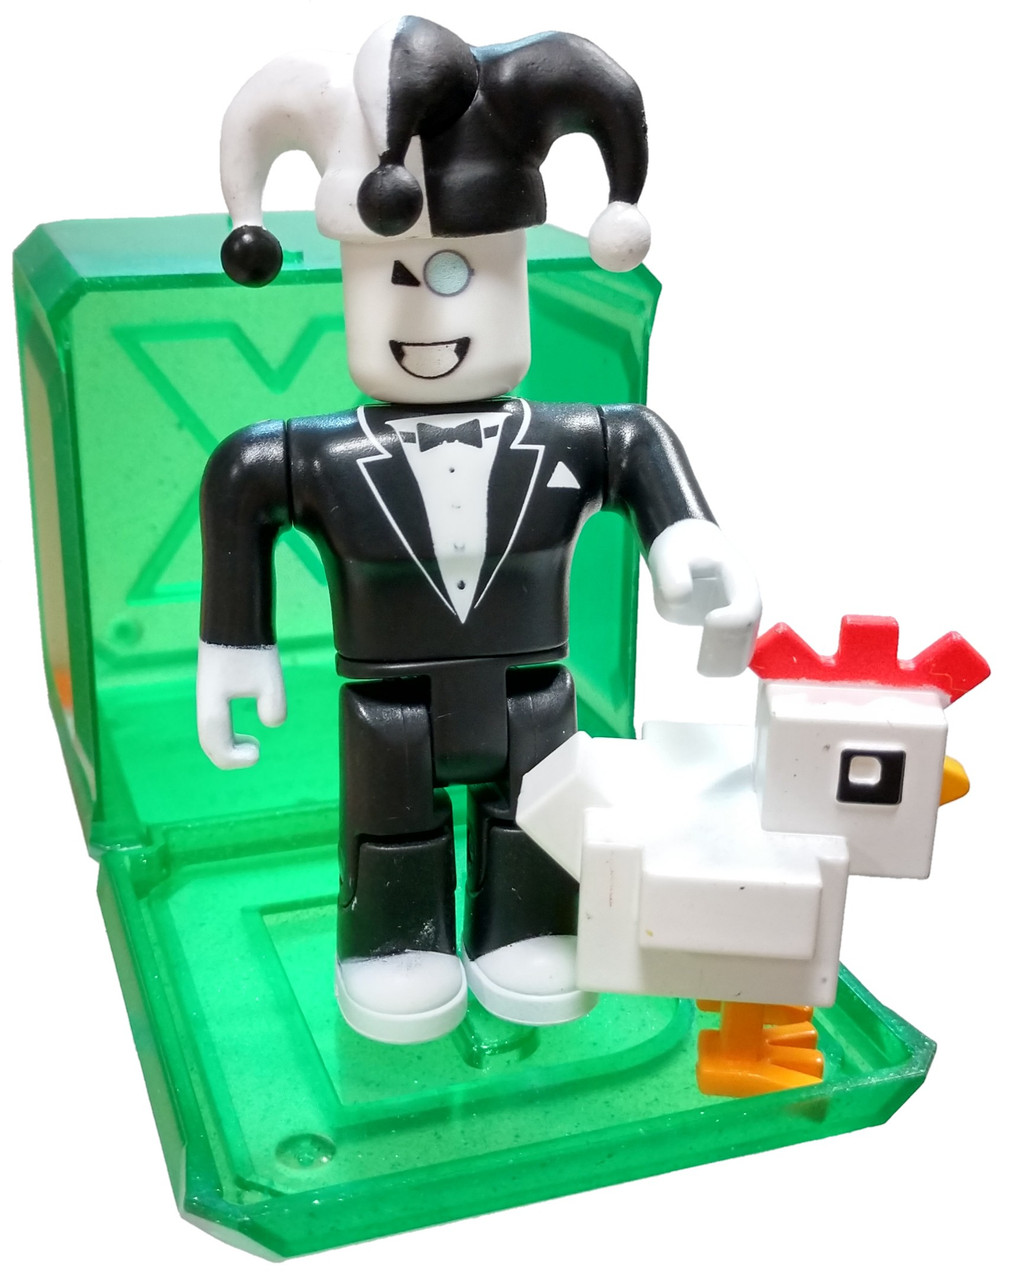 Roblox Celebrity Collection Series 4 Sirming 3 Mini Figure With Green Cube And Online Code Loose Jazwares Toywiz - roblox celebrity collection series 3 10 million robux man 3 mini figure with cube and online code loose jazwares toywiz